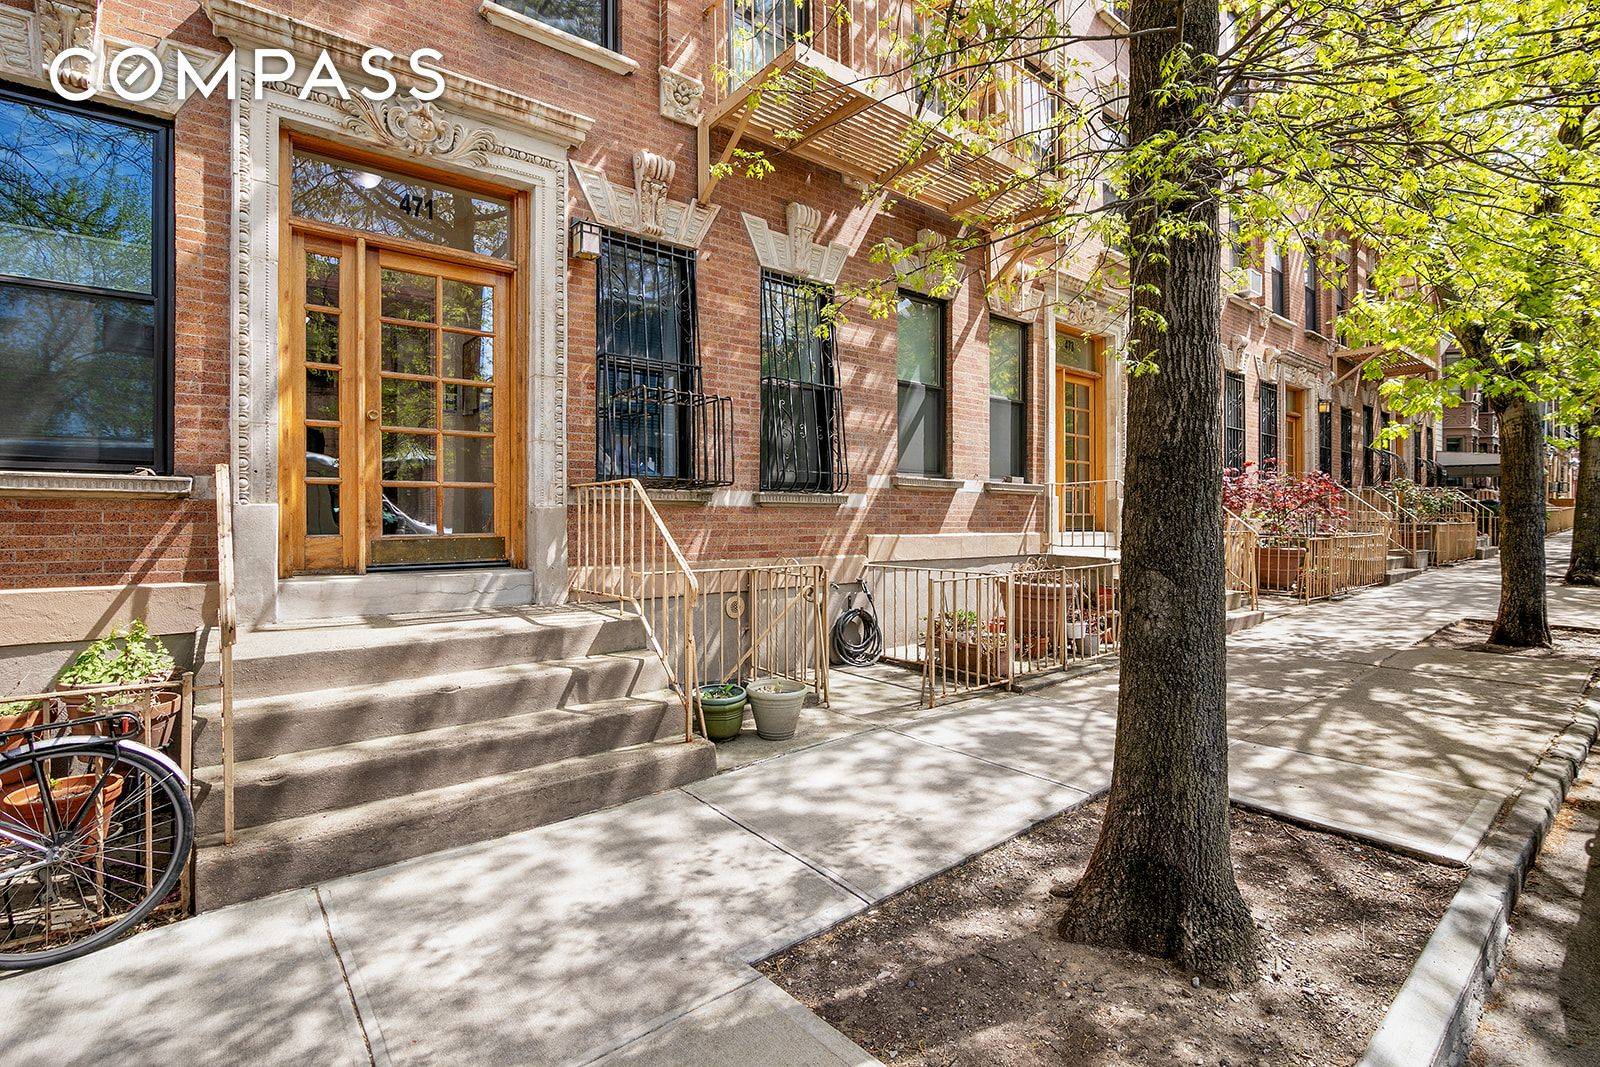 HDFC INCOME RESTRICTED 3 BD, 1BA in Park Slope !